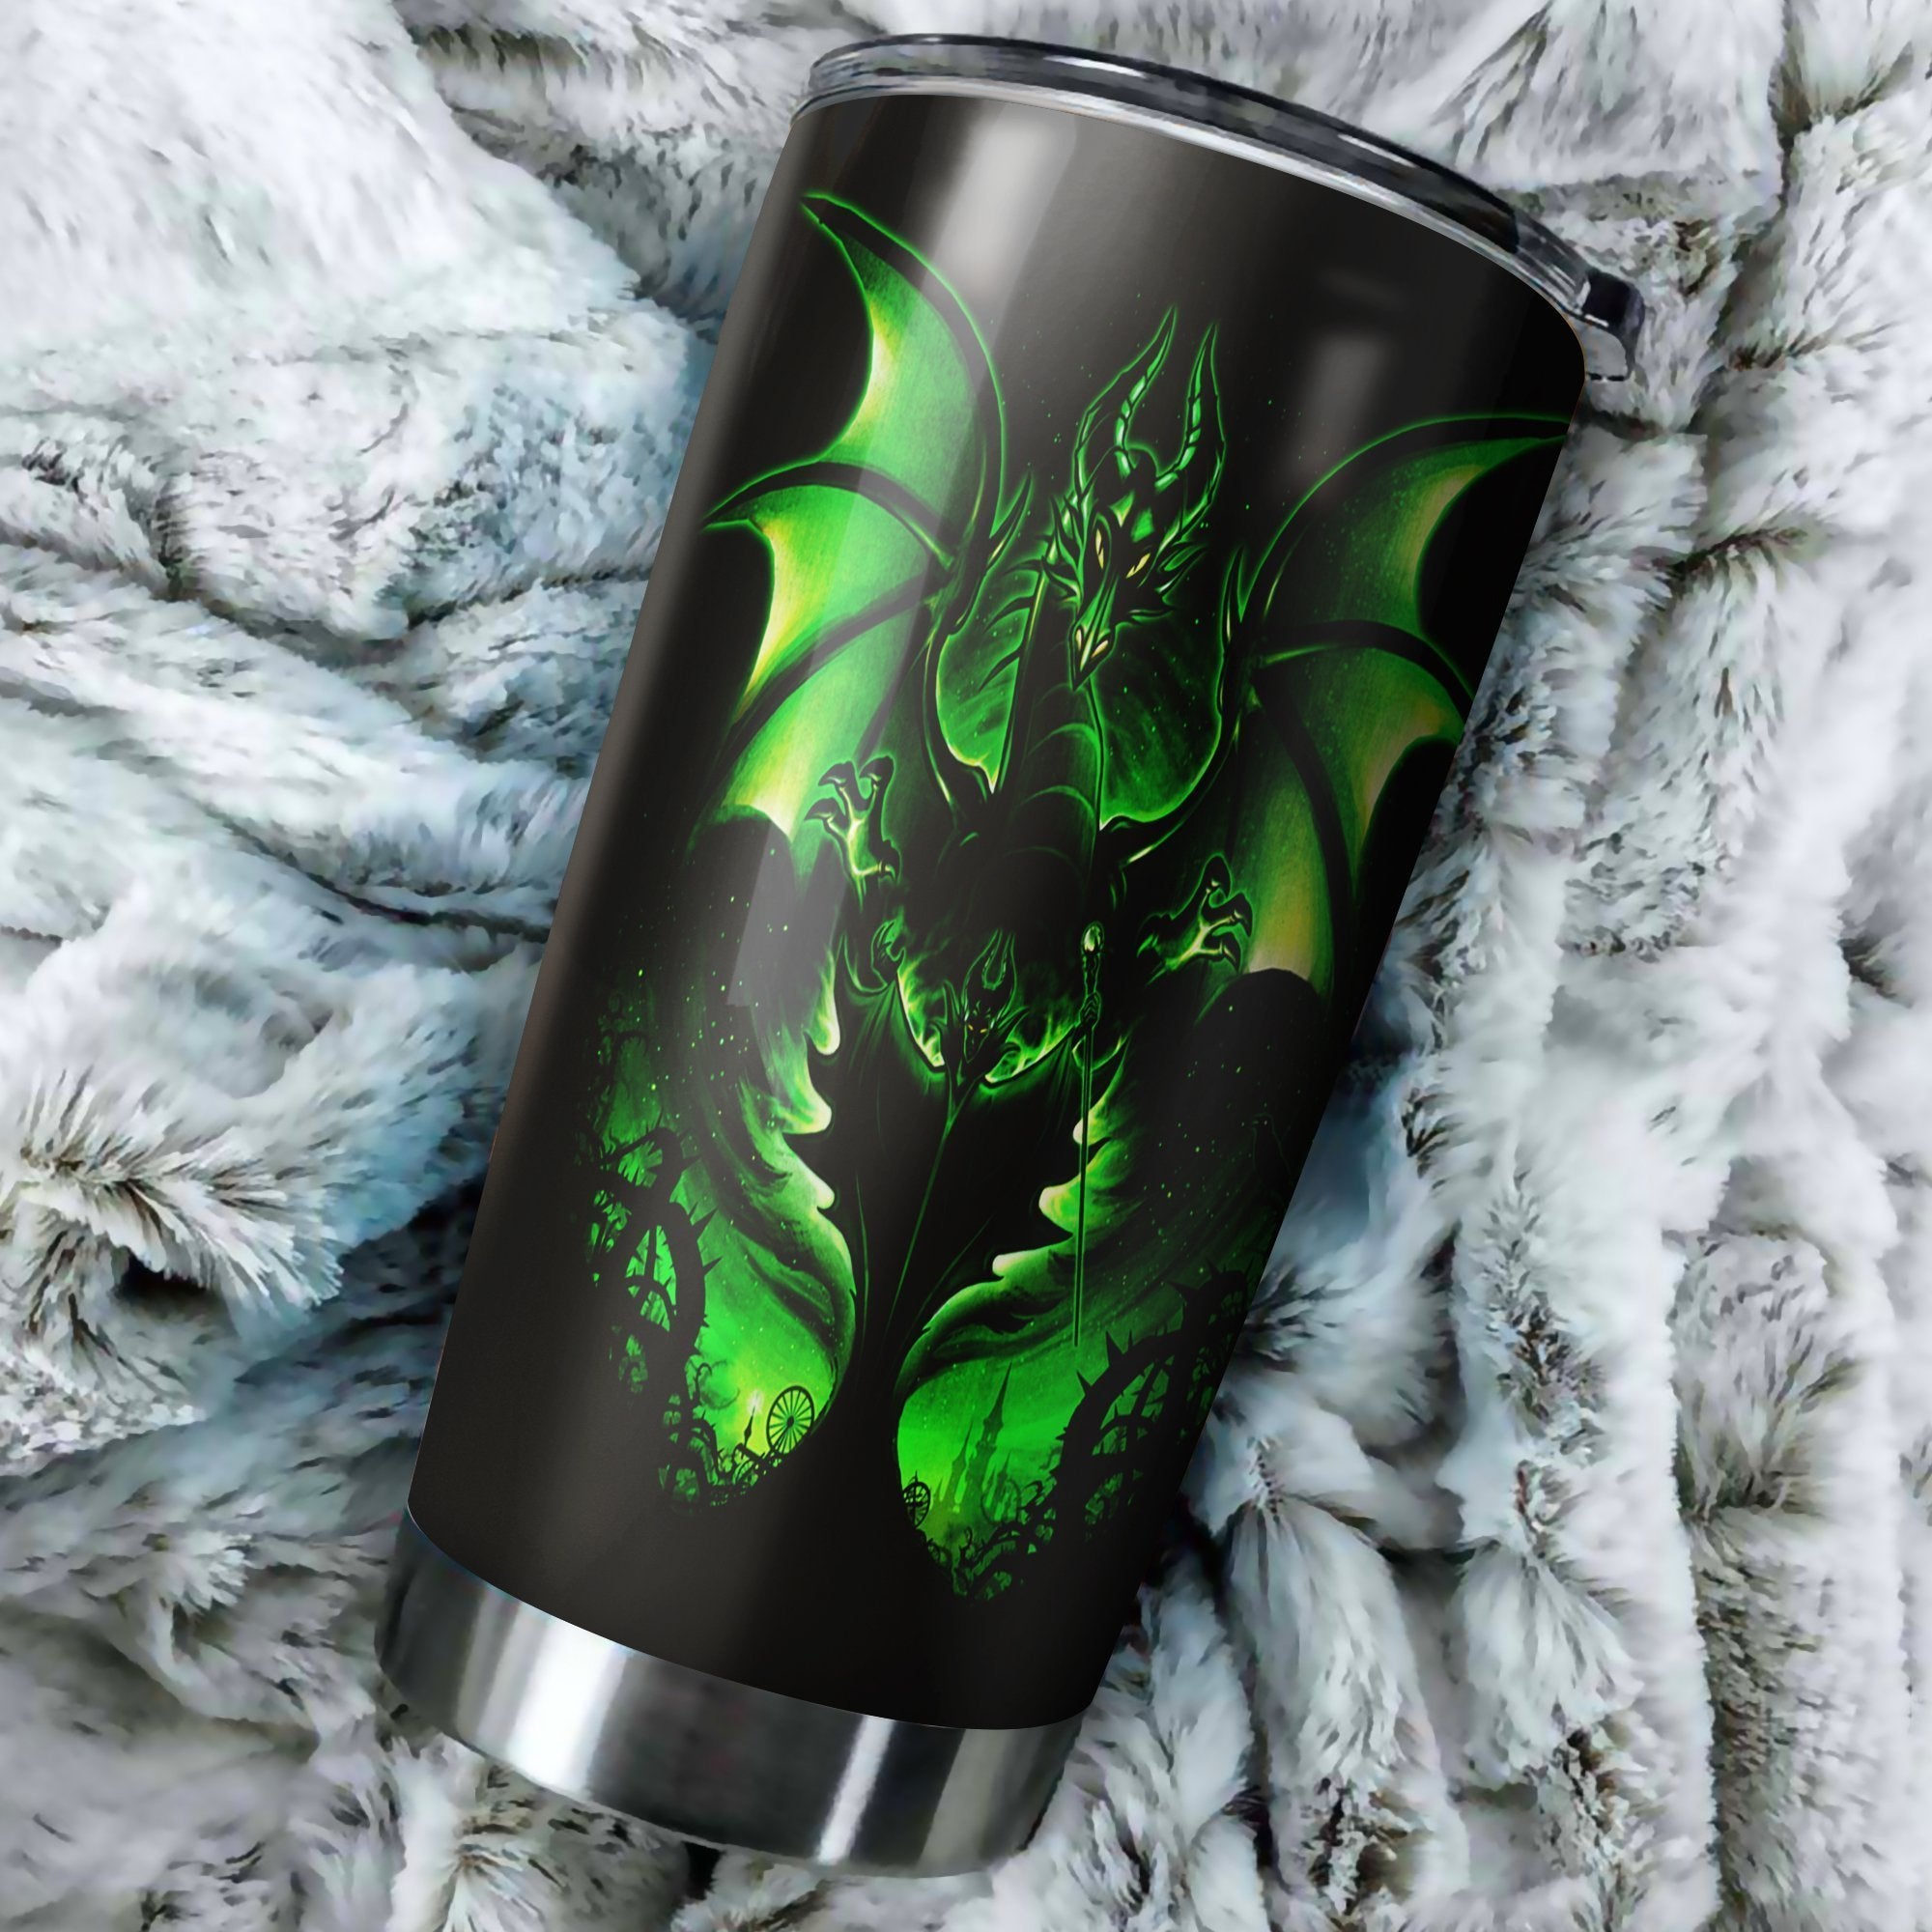 Maleficent 3D Tumbler Perfect Birthday Best Gift Stainless Traveling Mugs 2021